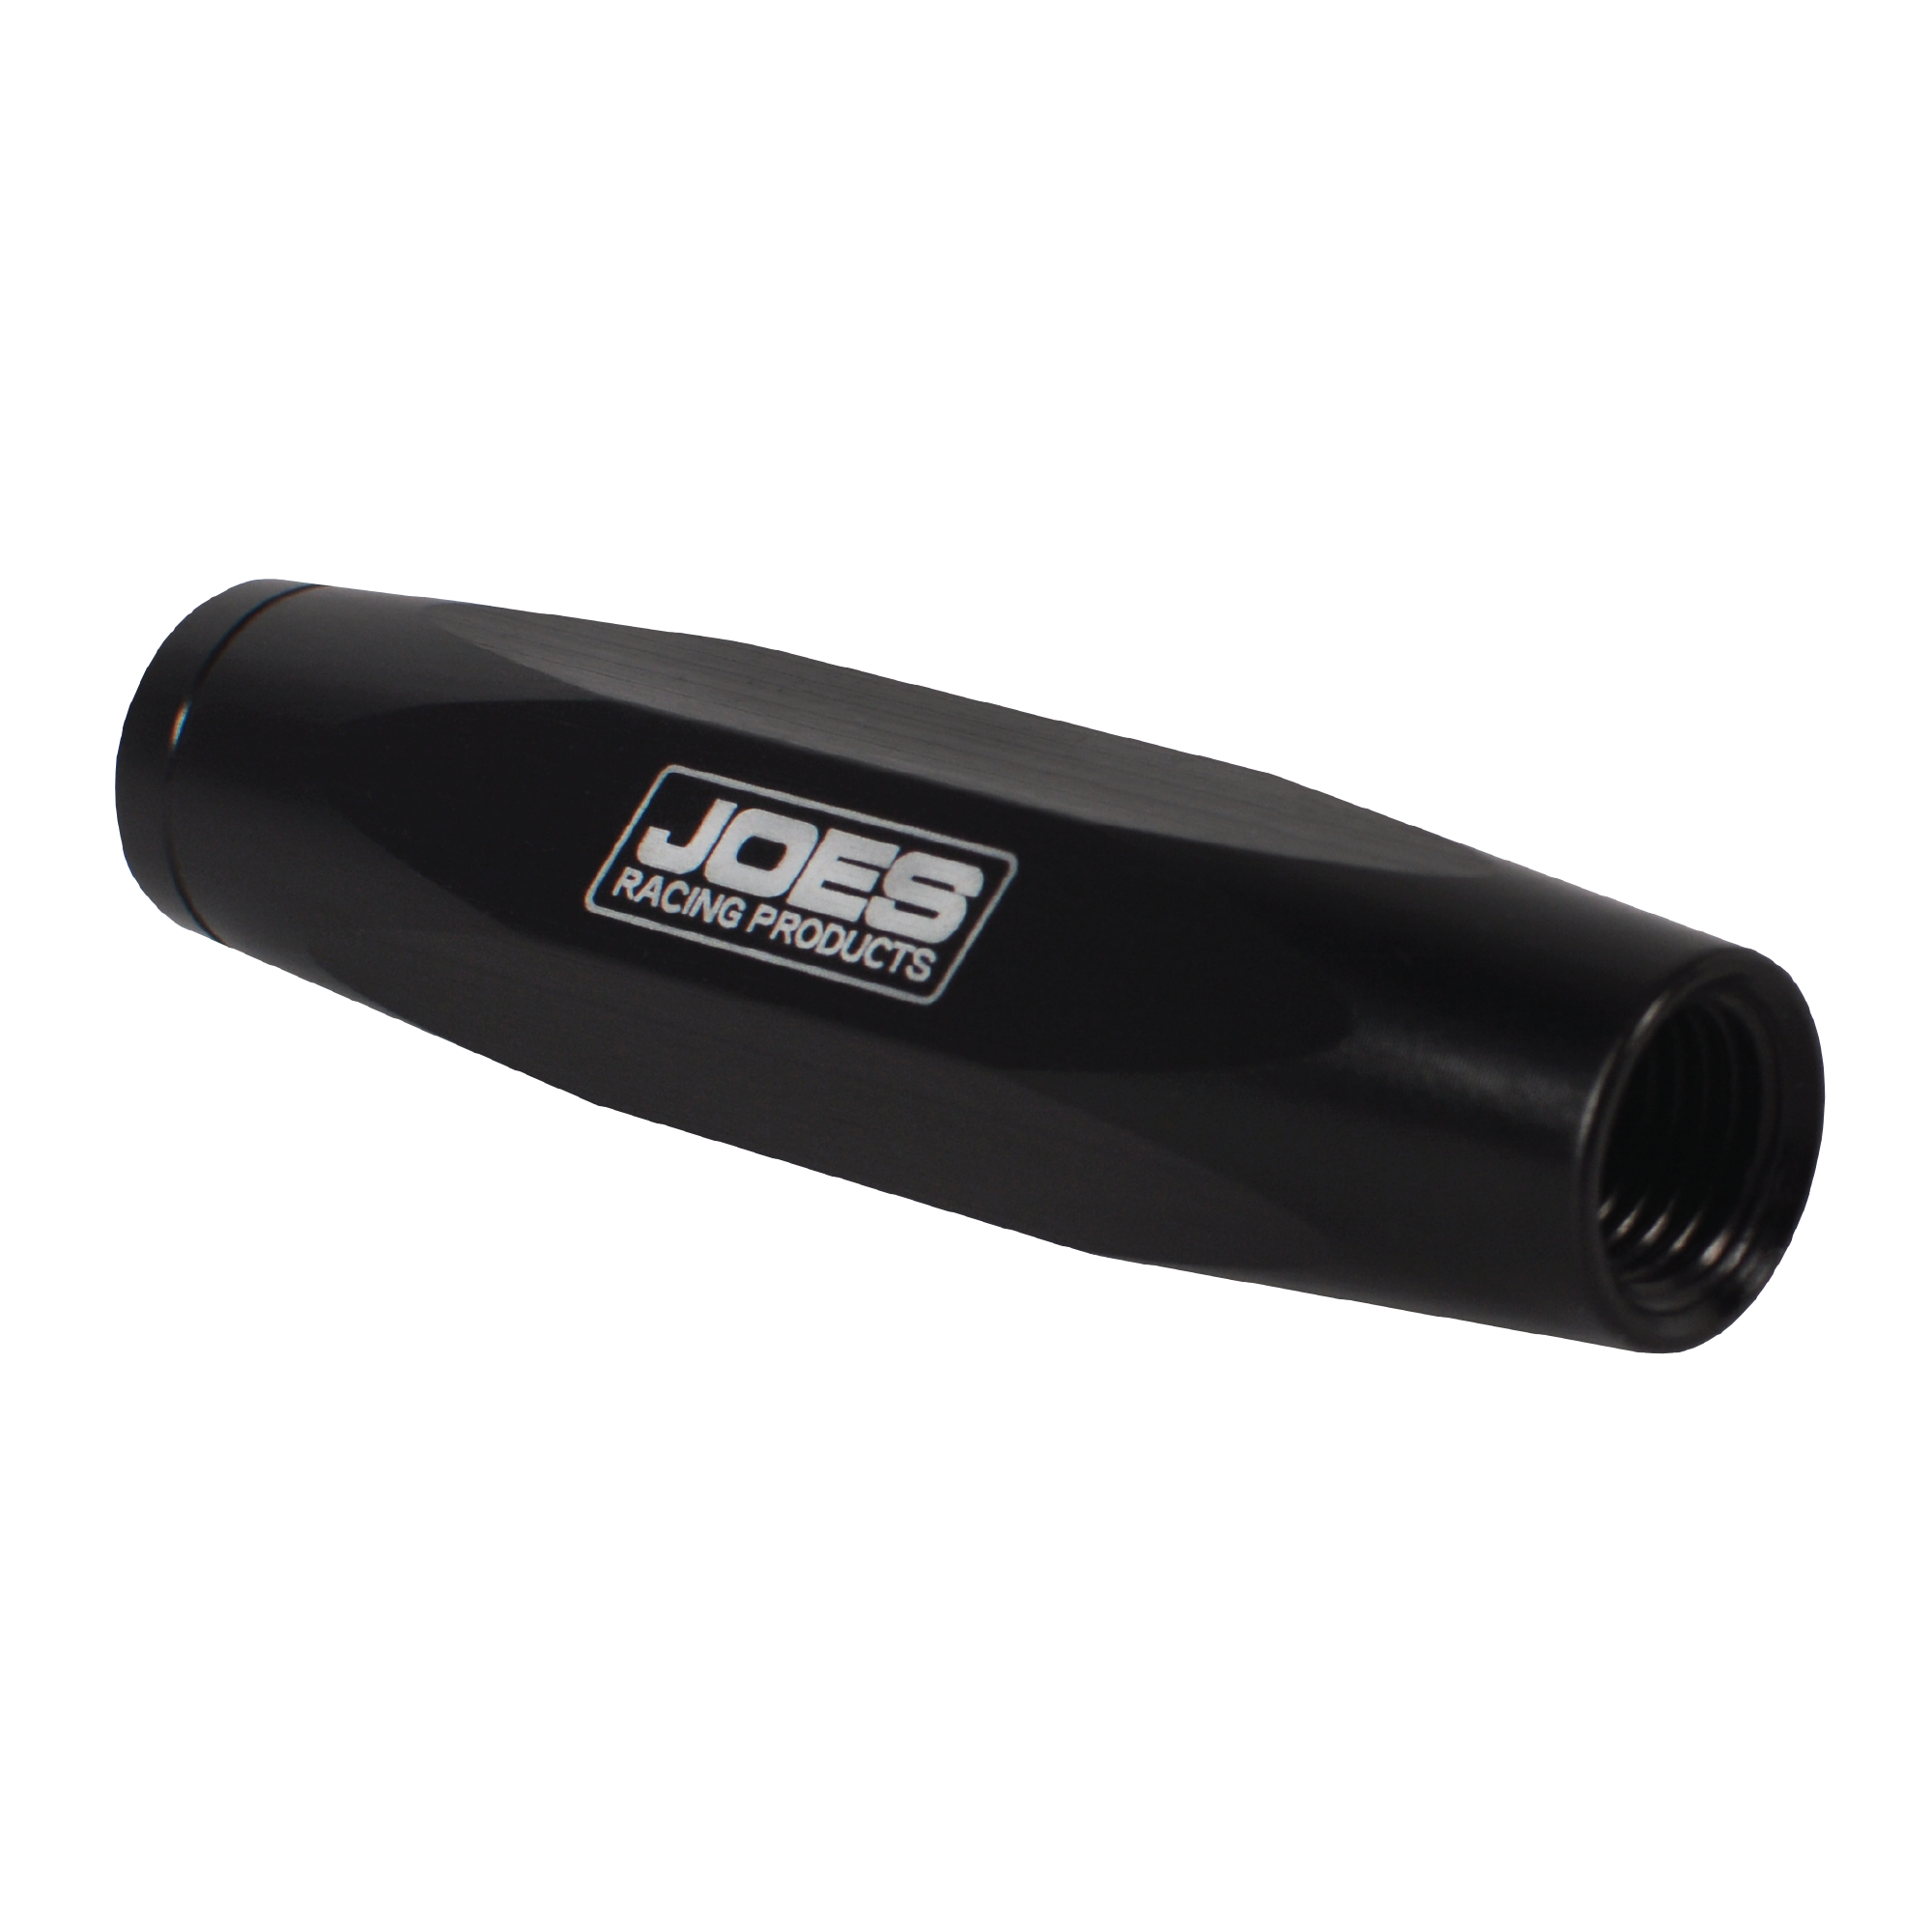 JOES Kart Caster Rod - JOES Racing Products